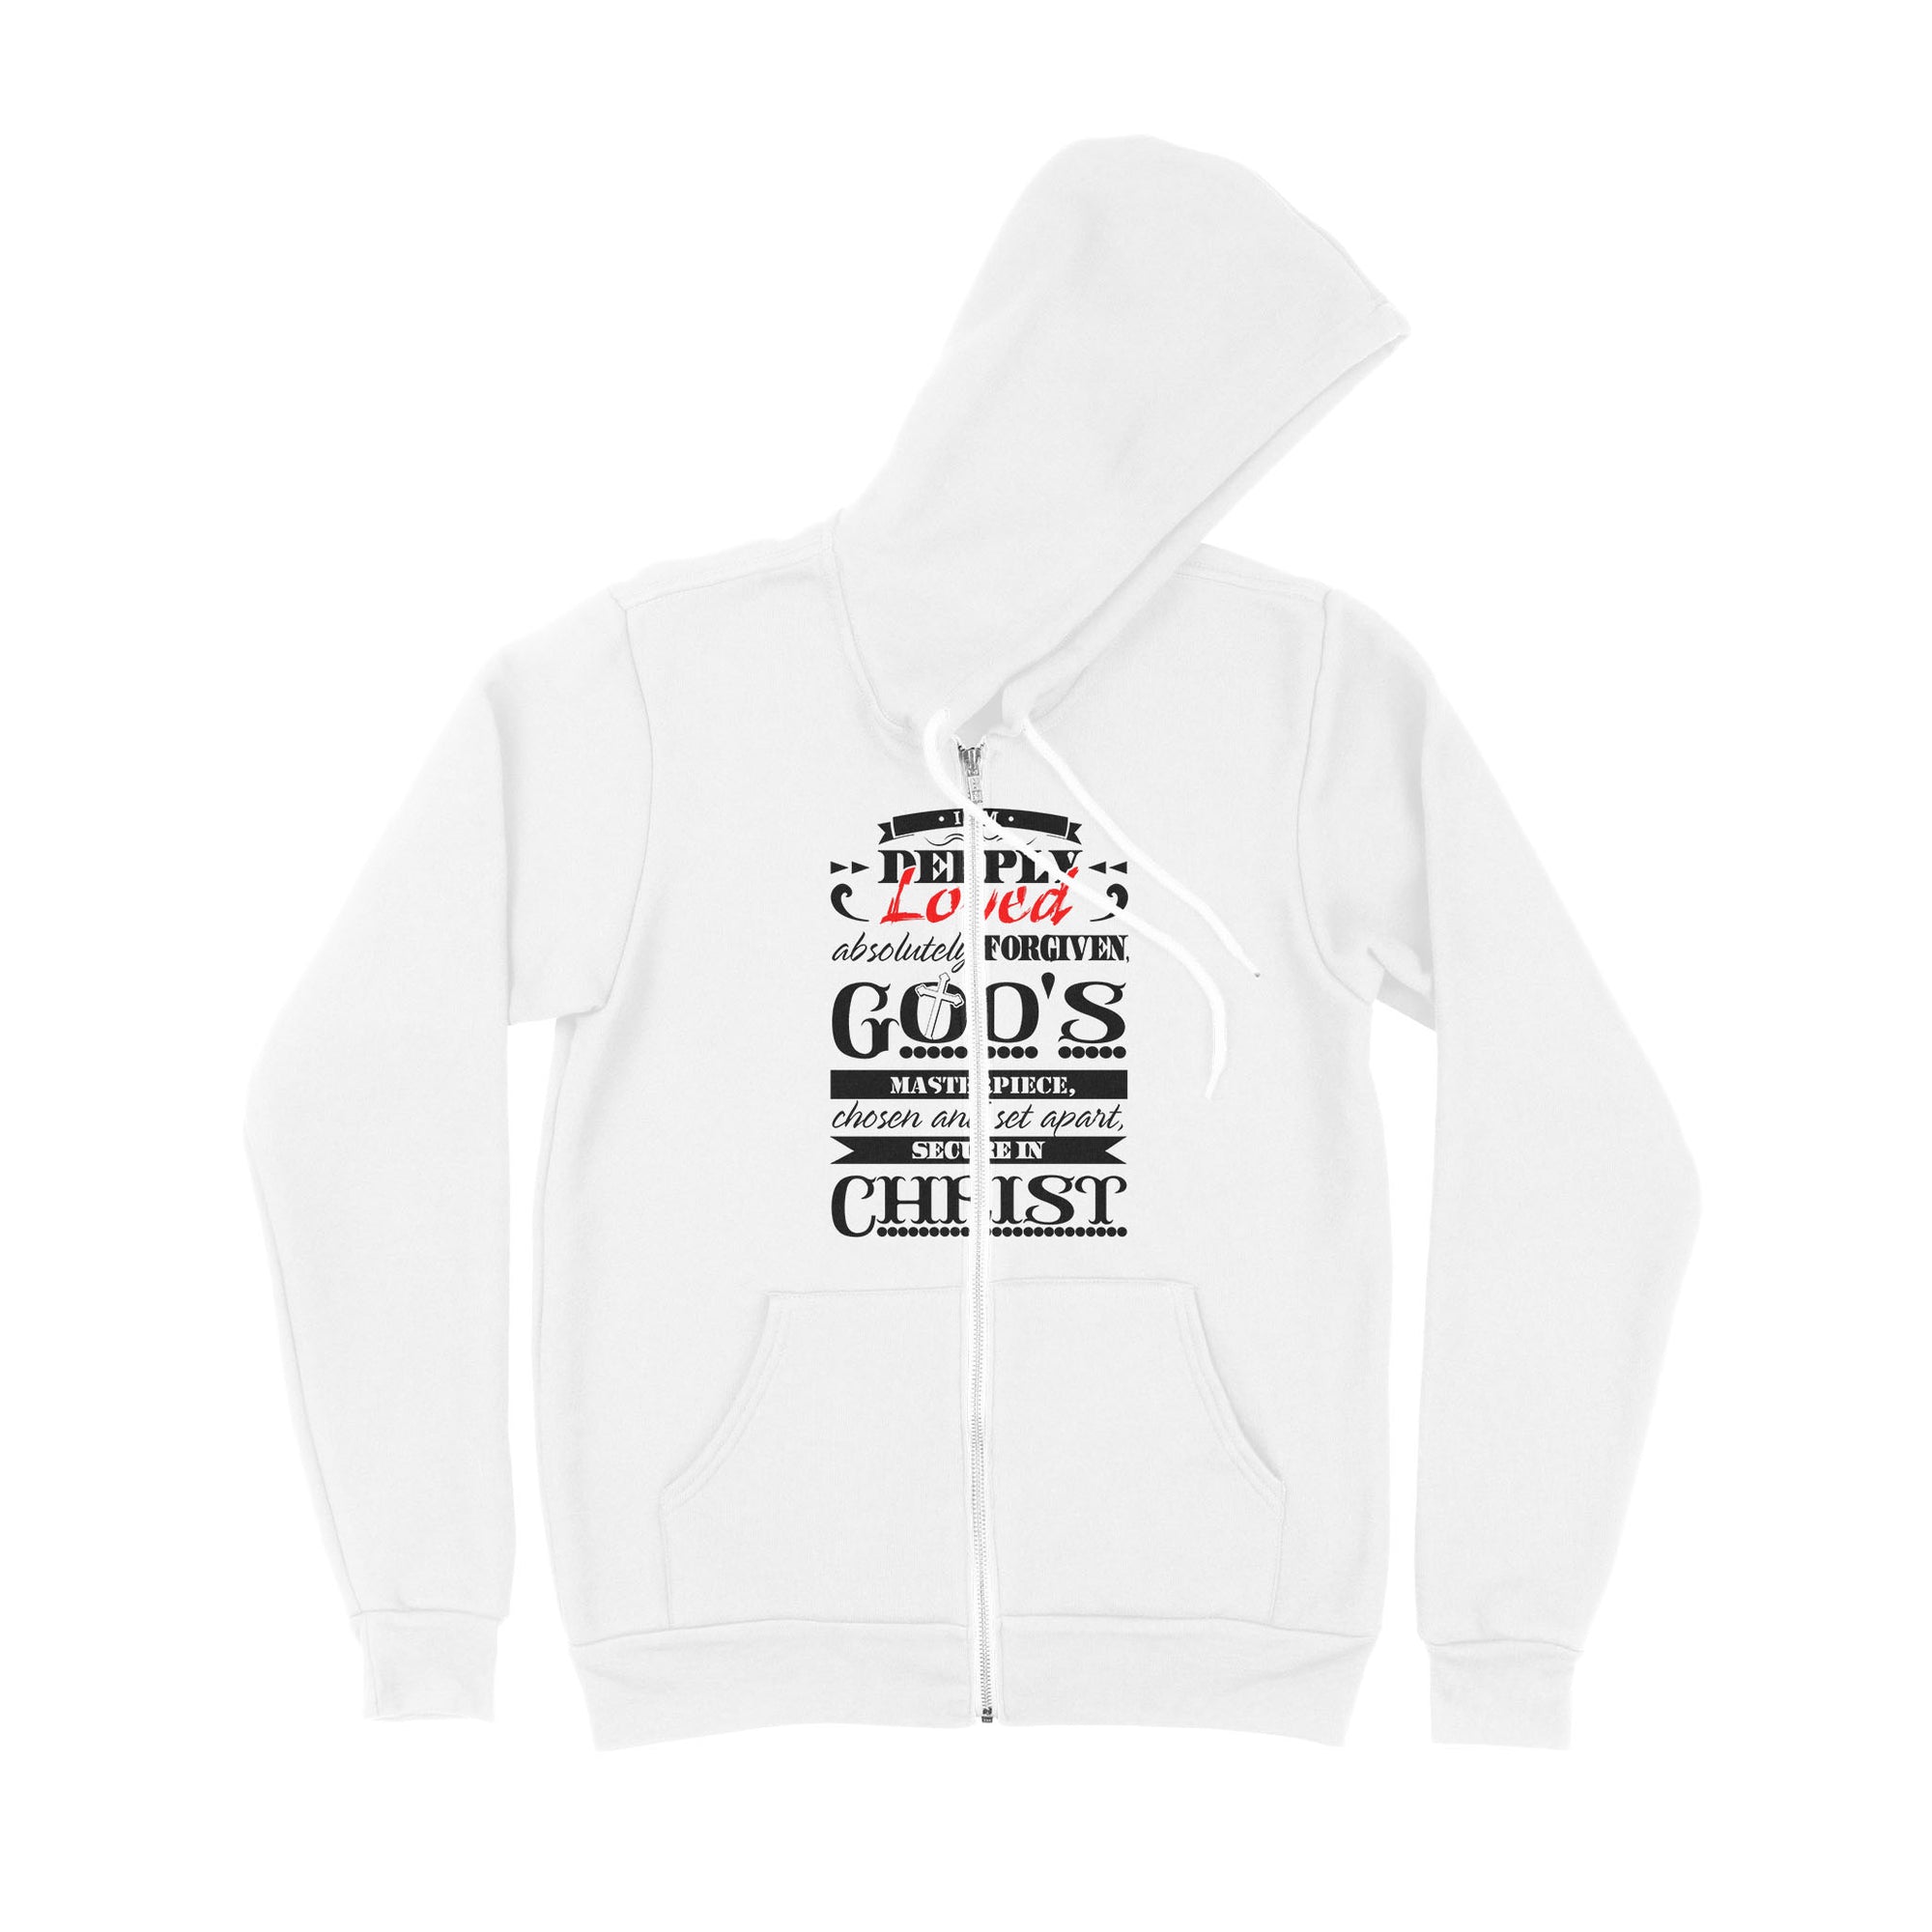 I Am Deeply Loved, Absolutely Forgiven, God's Masterpiece, Chosen and Set Apart, Secure in Christ - Premium Zip Hoodie